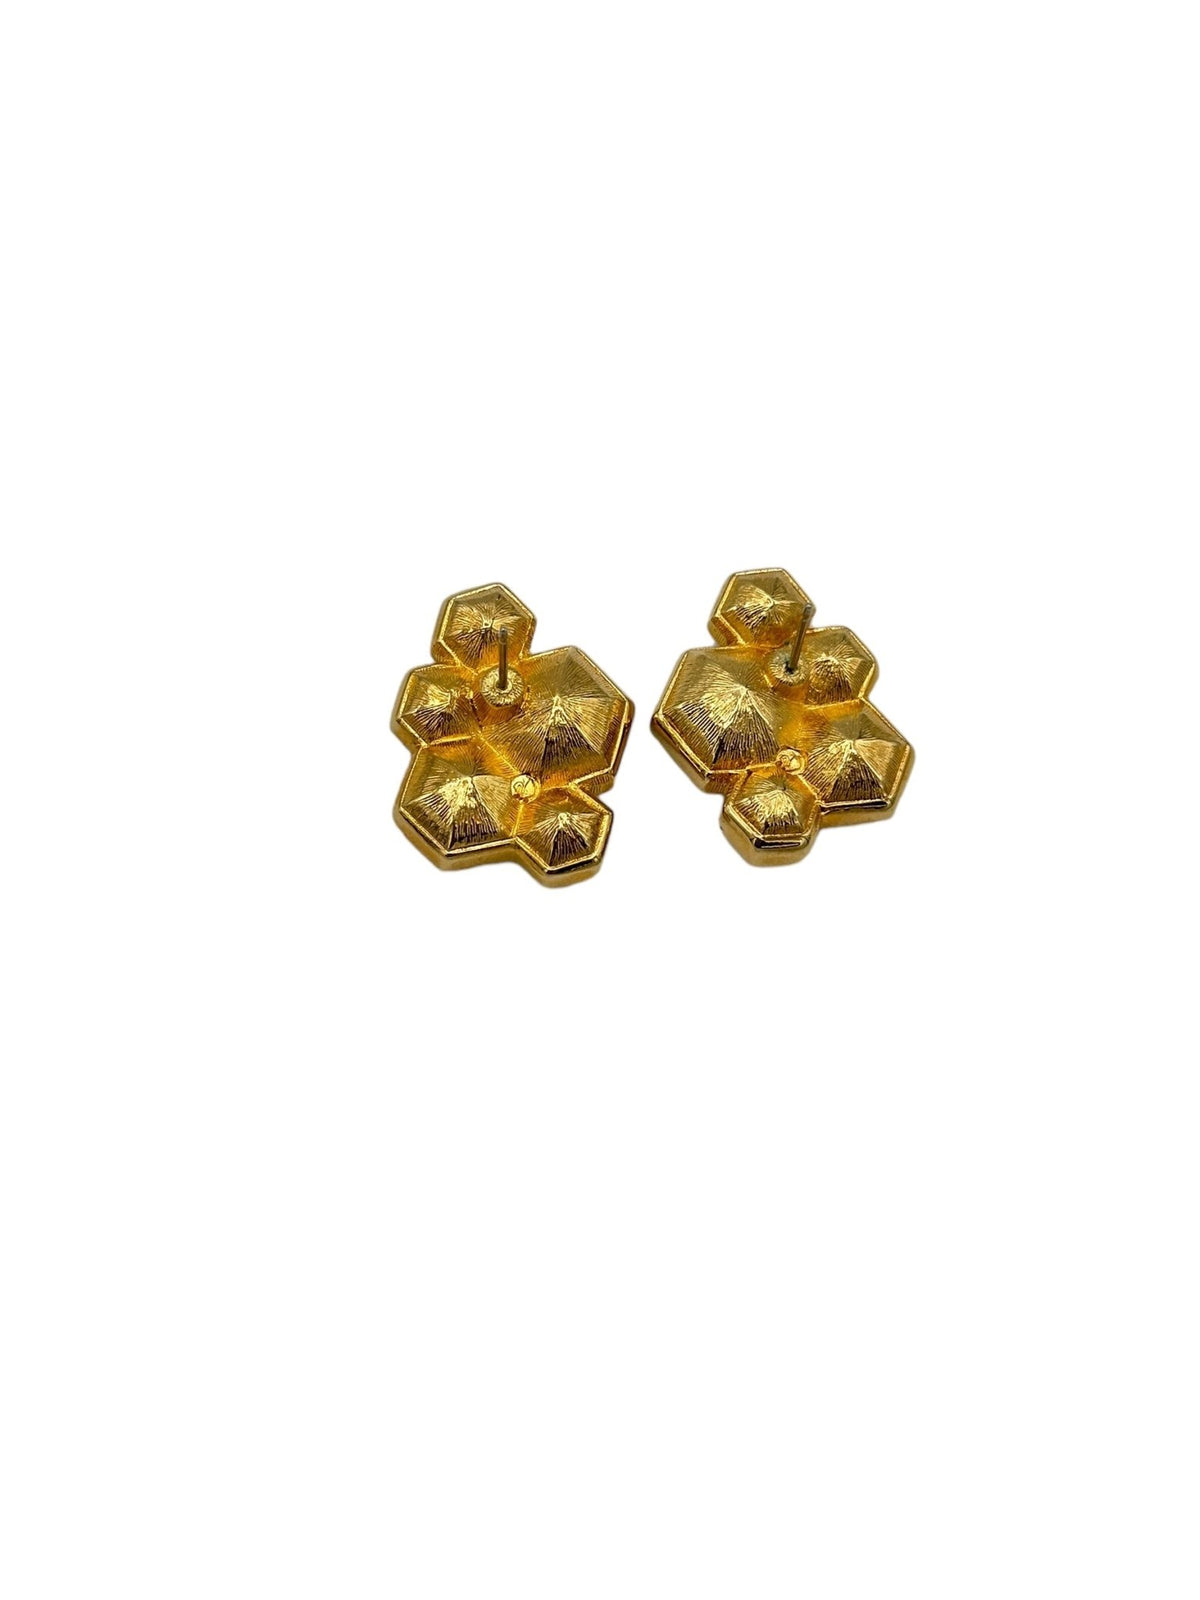 Gold Swarovski SAL Clear Crystal Classic Honeycomb Pierced Earrings - 24 Wishes Vintage Jewelry